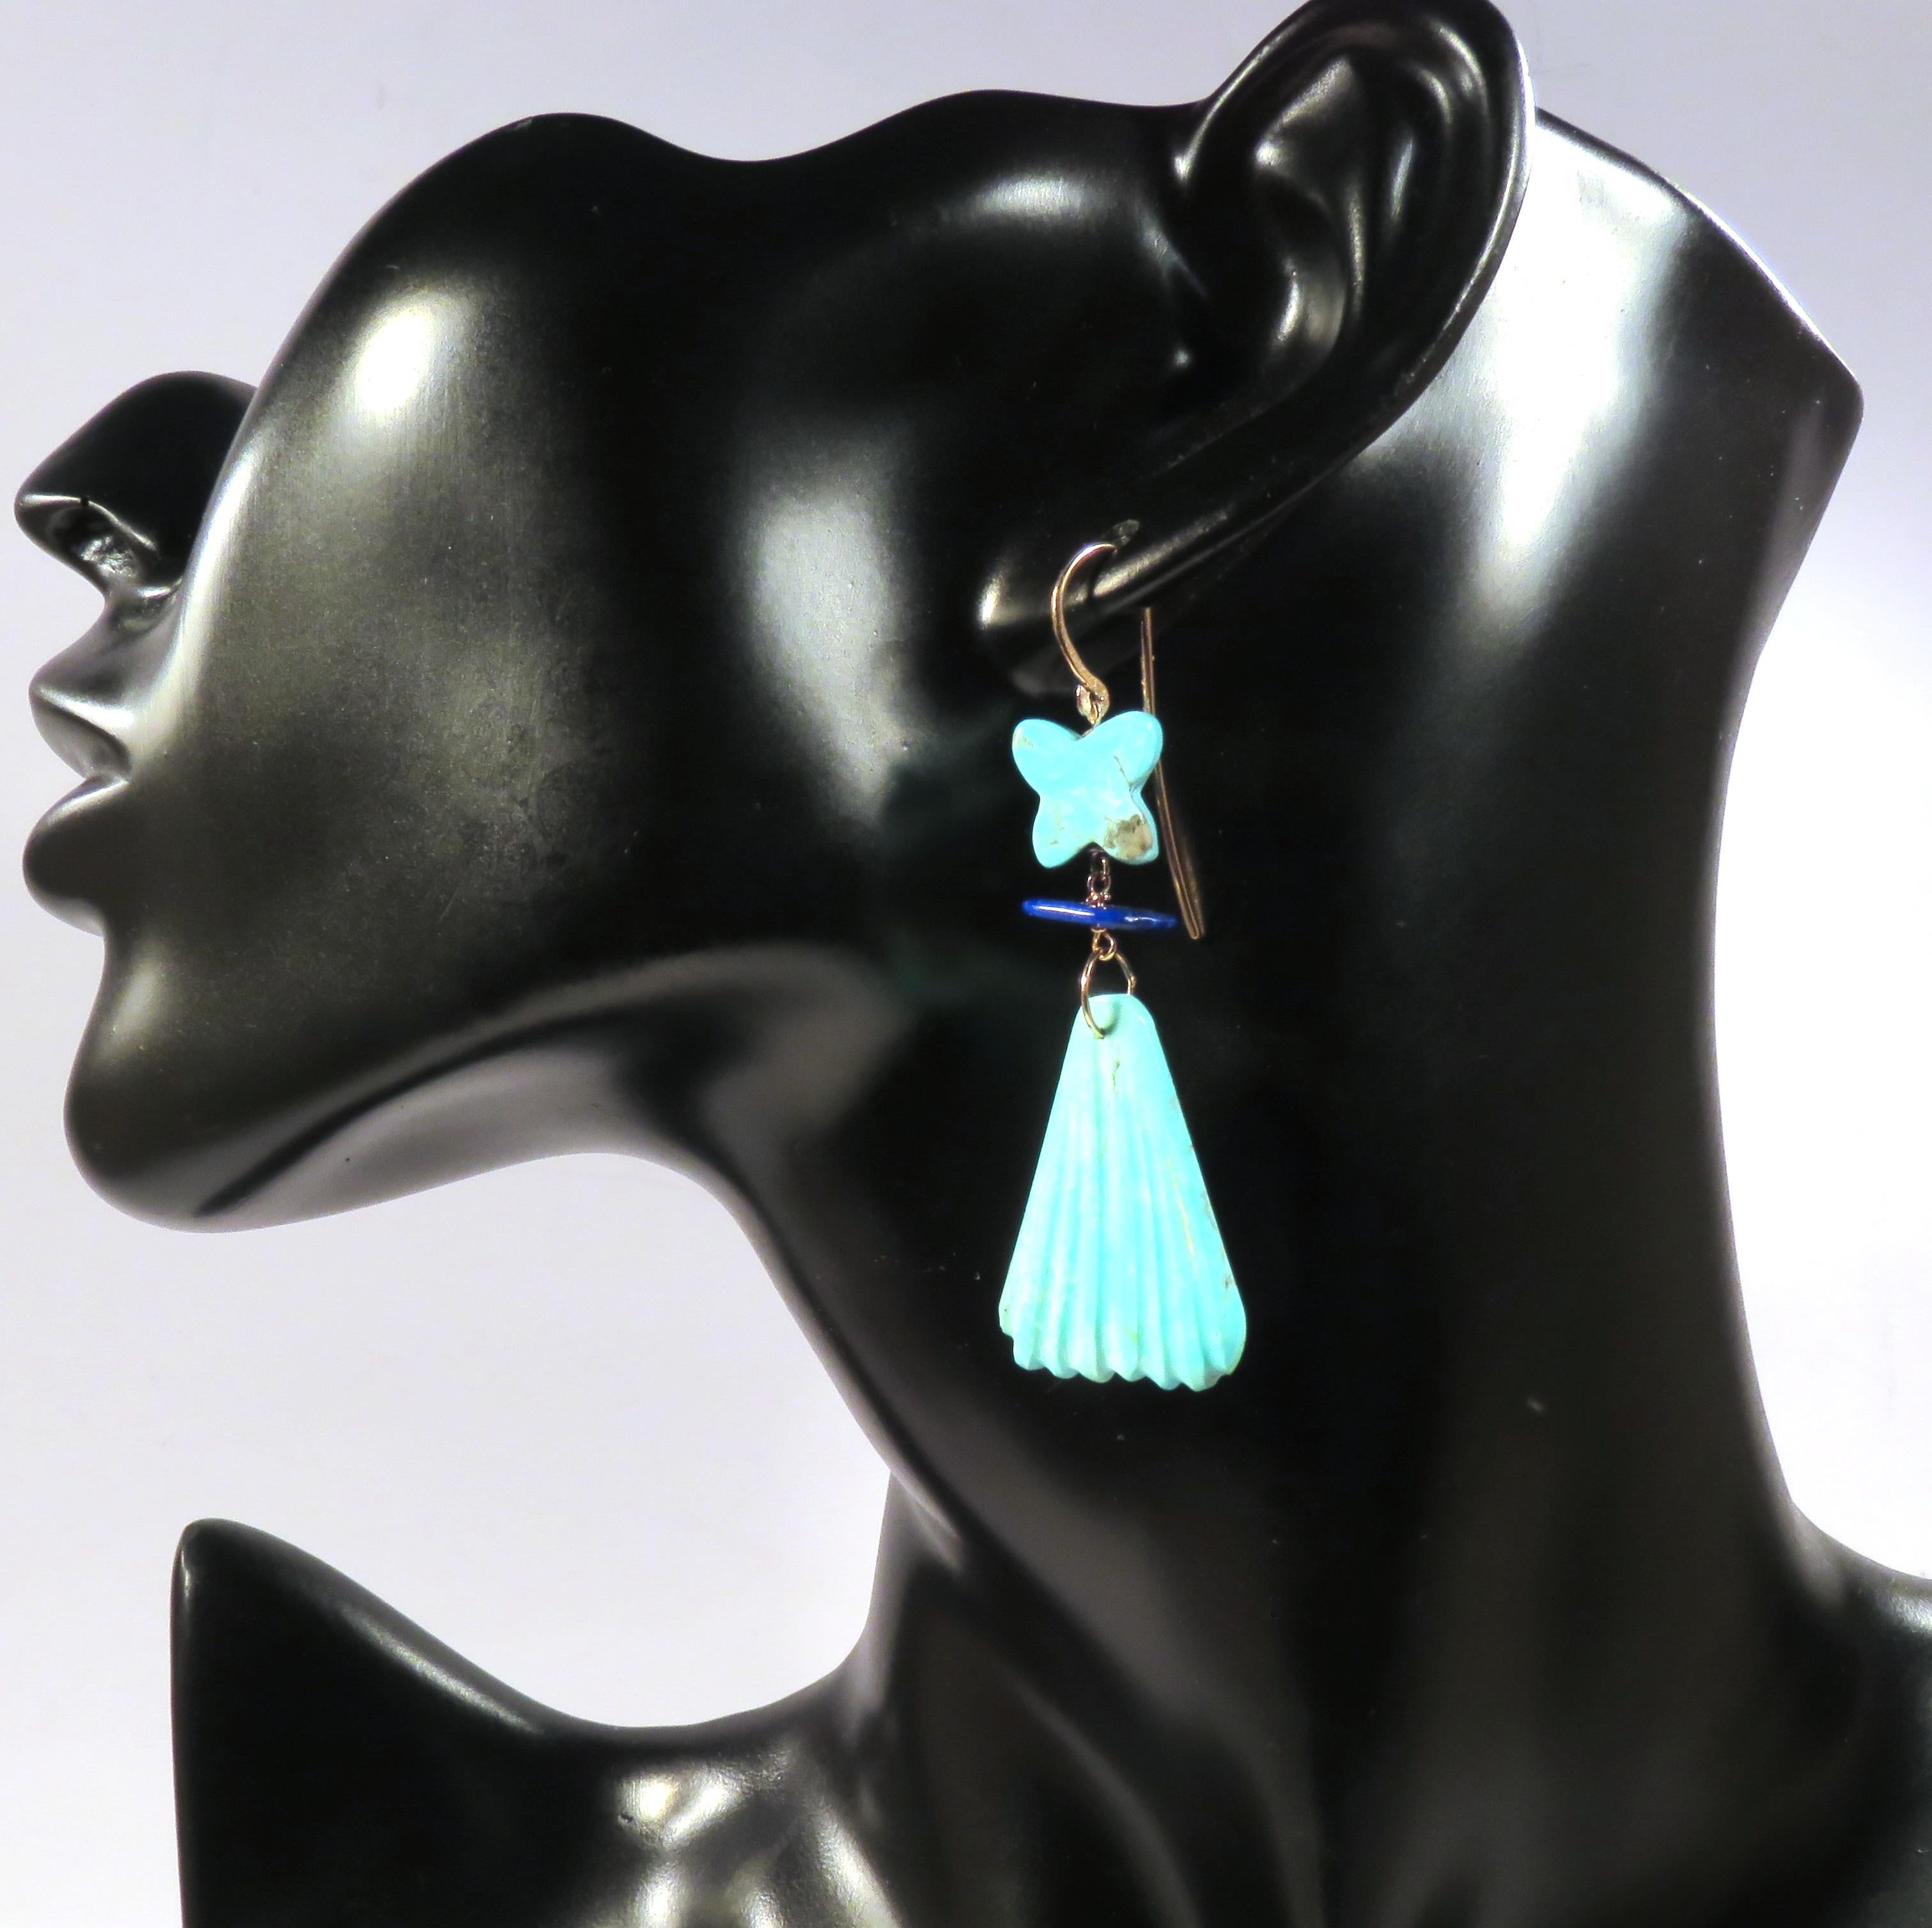 Pendant earrings featuring genuine hand-carved turquoise fans, little vivid light blue turquoise butterflies and natural lapis lazuli. Each earring is handcrafted in 9 karat rose gold, the total length is 58 mm / 2.283 inches. Marked with the